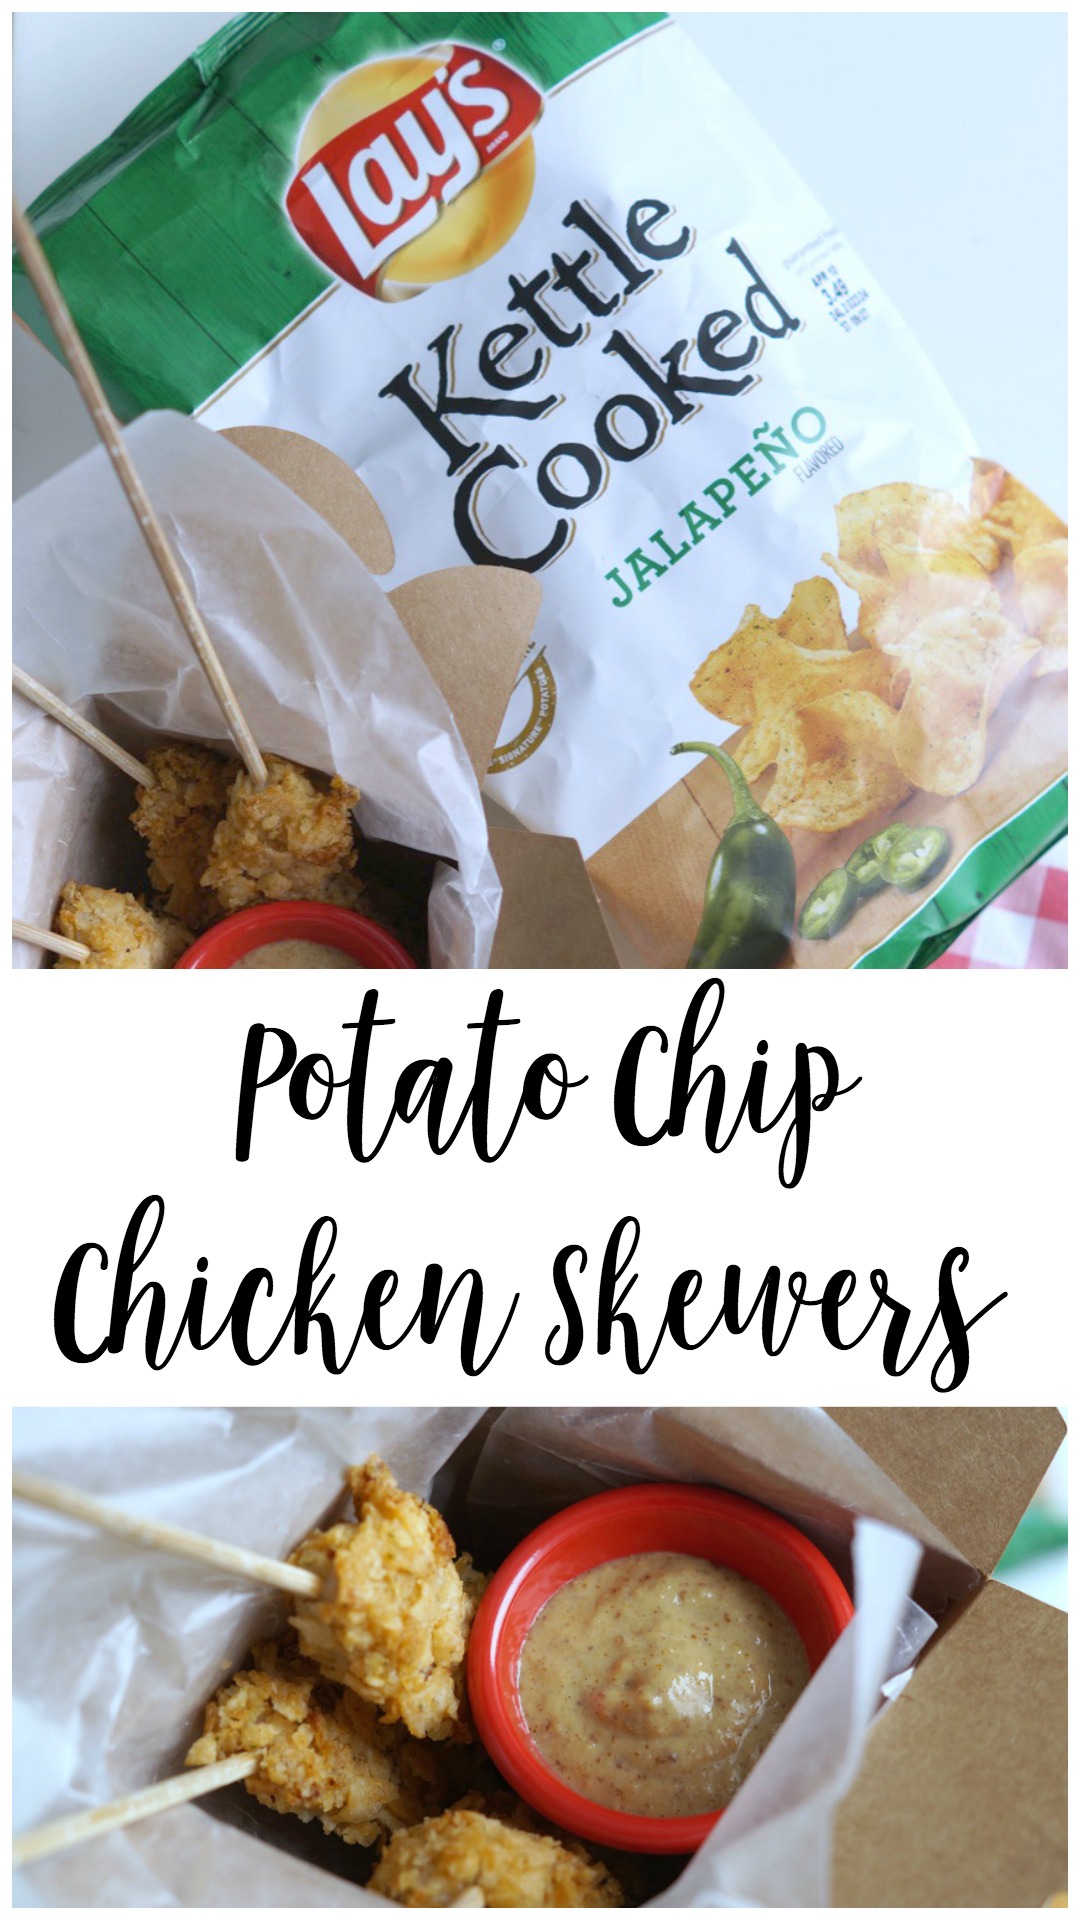 This Potato Chip Chicken recipe is quick and easy - perfect for busy weeknights and serving while watching your favorite baseball game on TV!